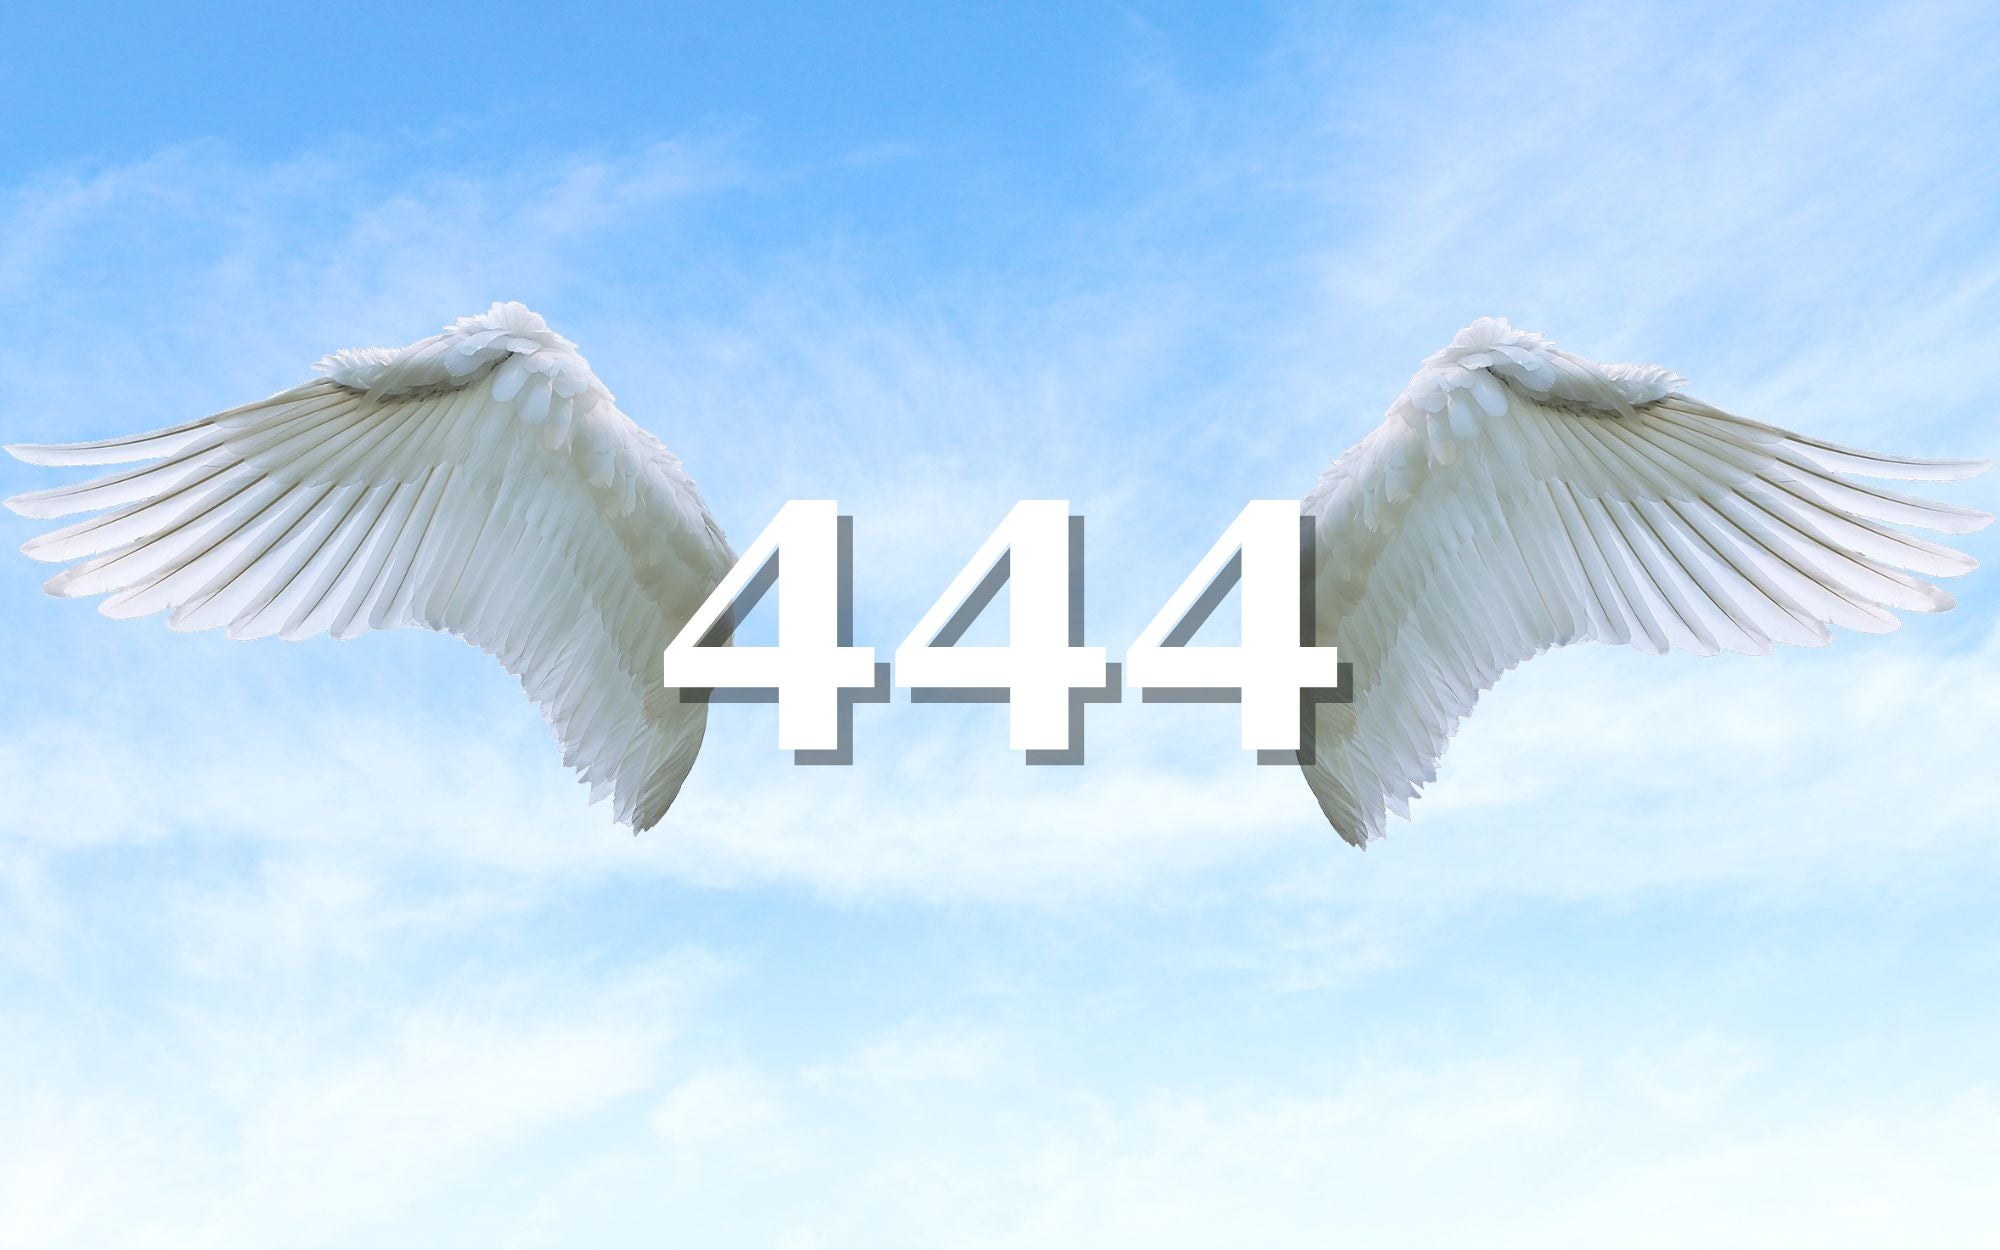 angel numbers meaning - 444